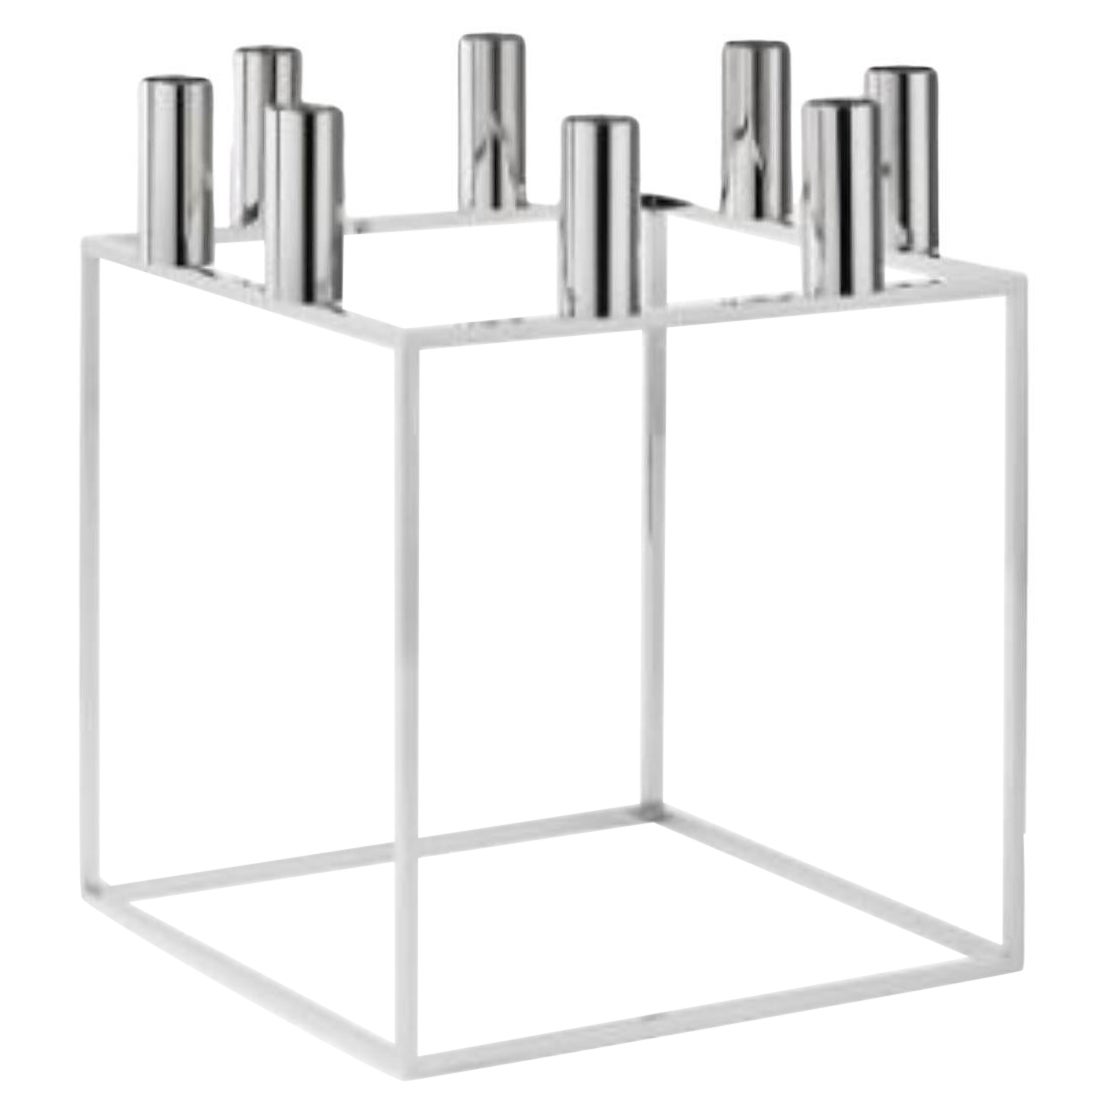 Nickel Plated Kubus 8 Candle Holder by Lassen